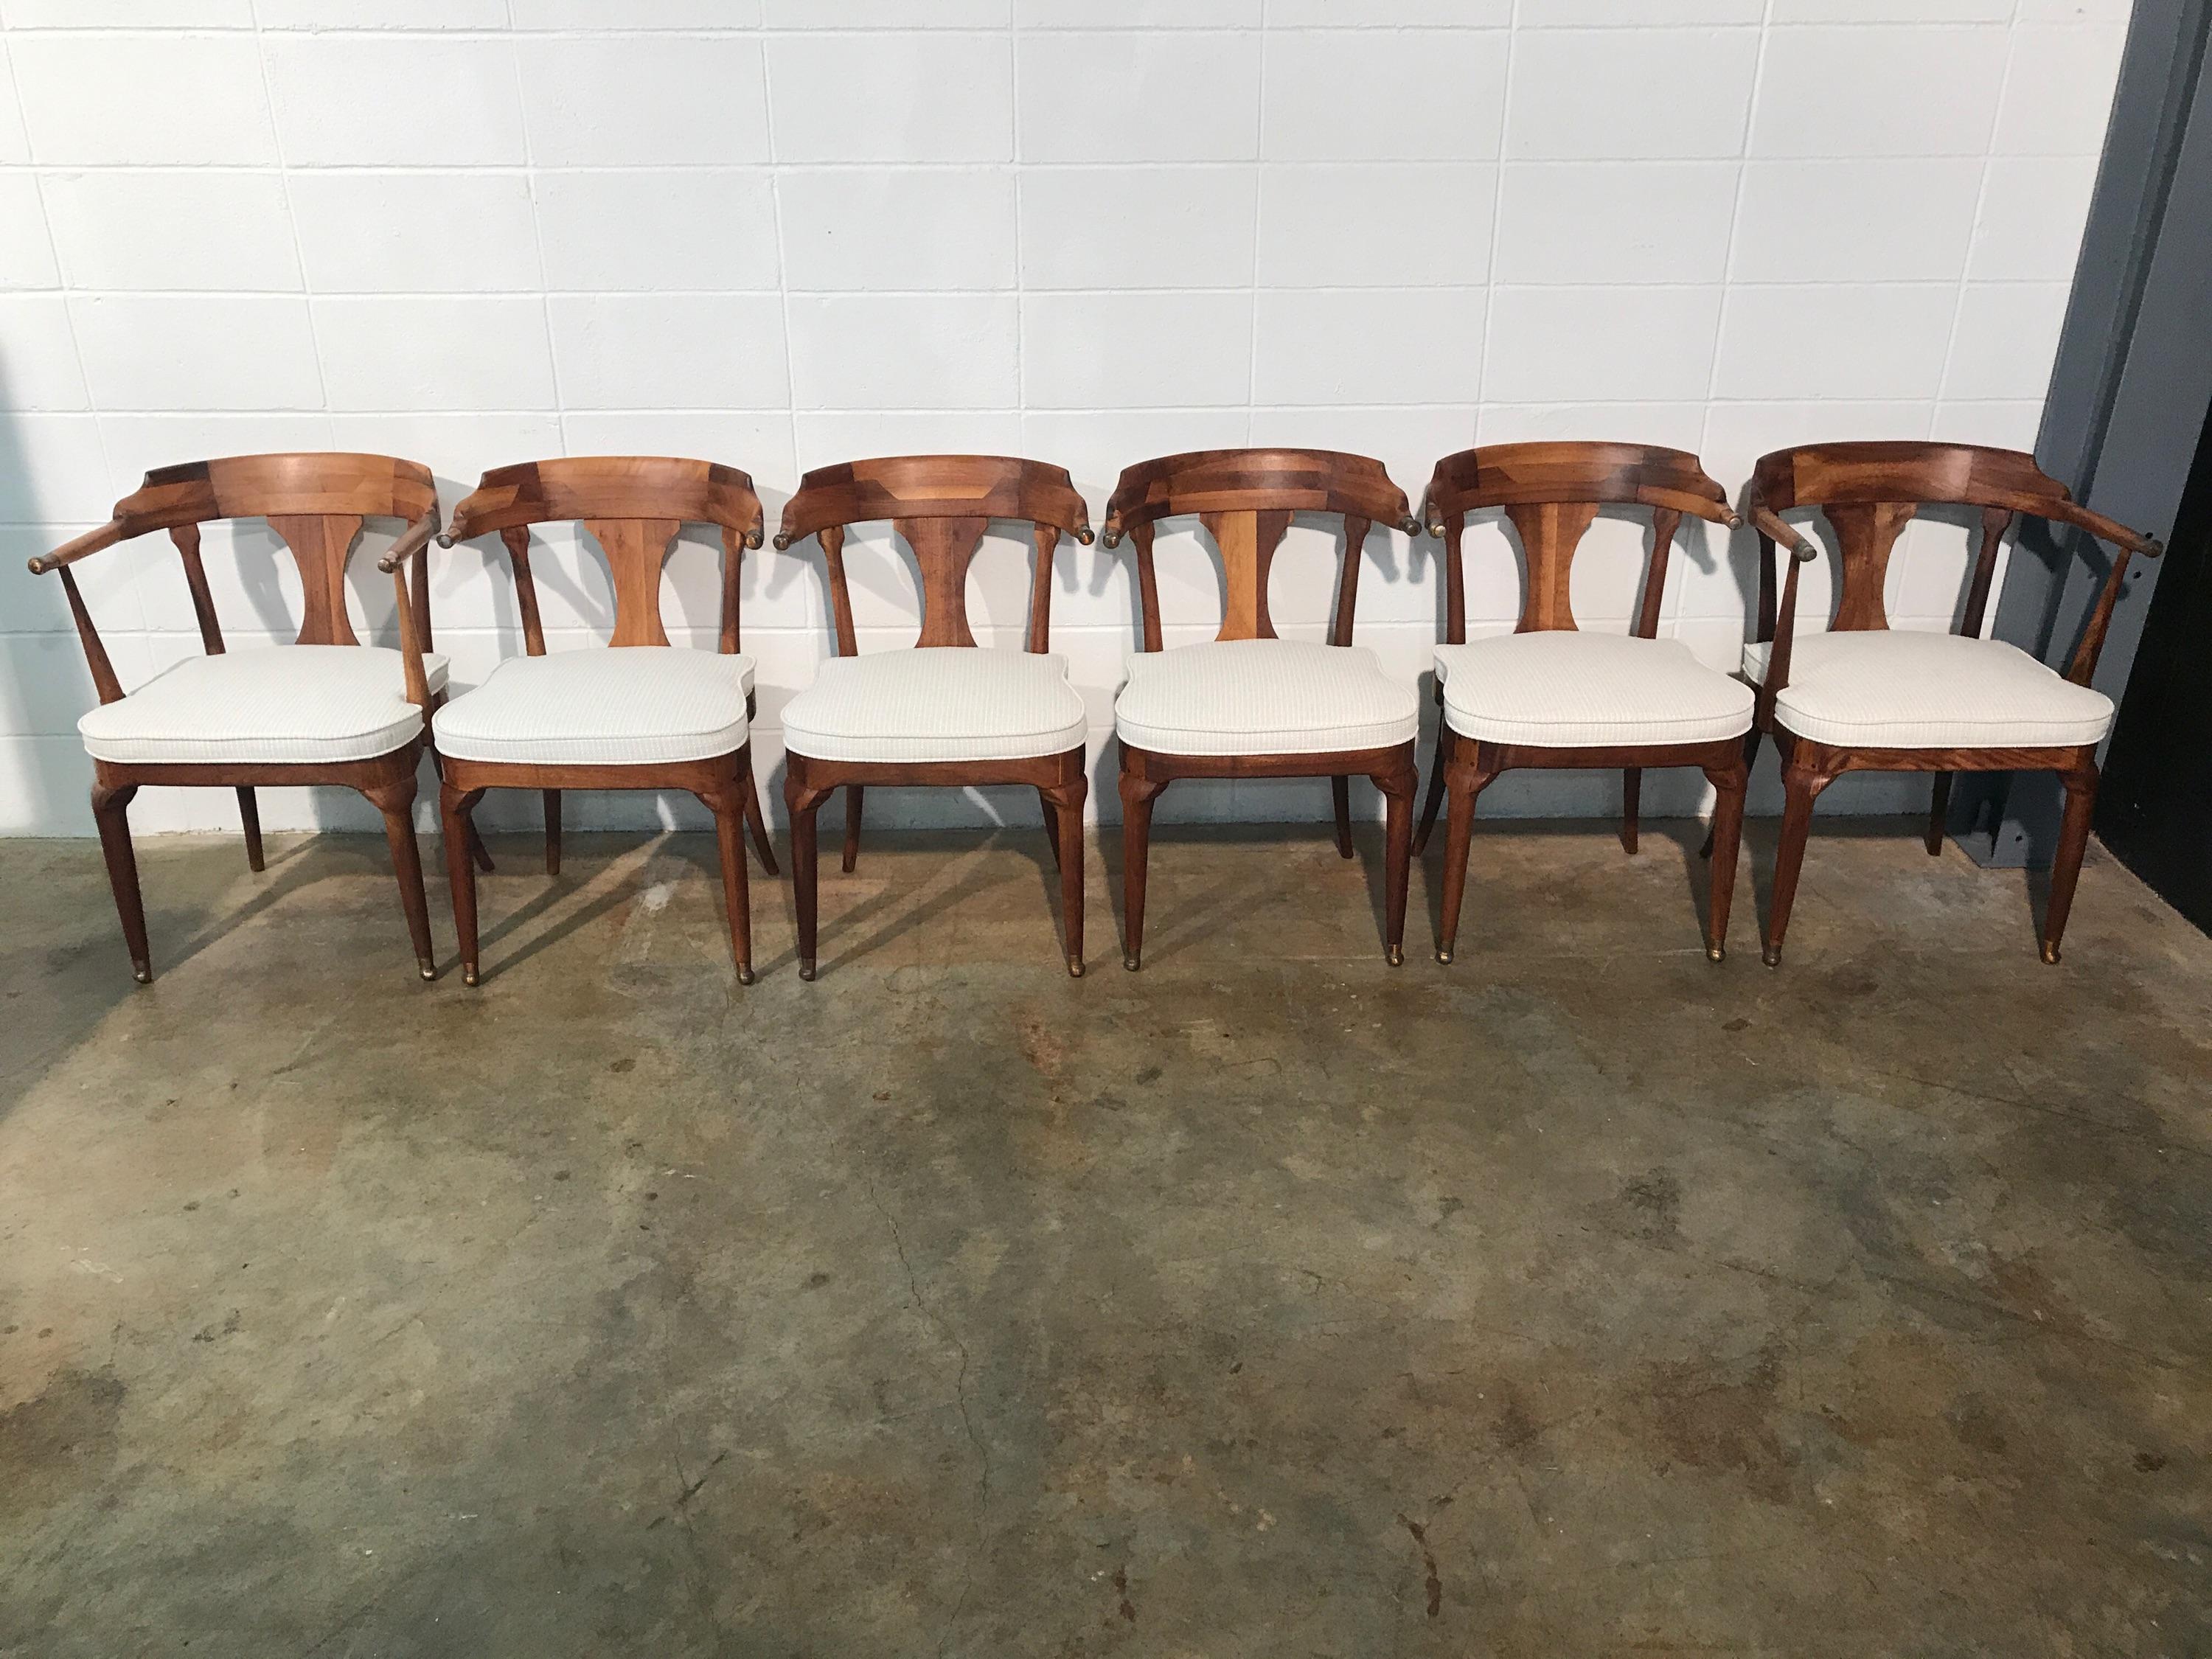 Restored and unusual midcentury dining chairs, set of six
These dining chairs are simply stunning. They have an unusual design and exceptional construction similar to that of a studio craft chair. They have been restored including being completely